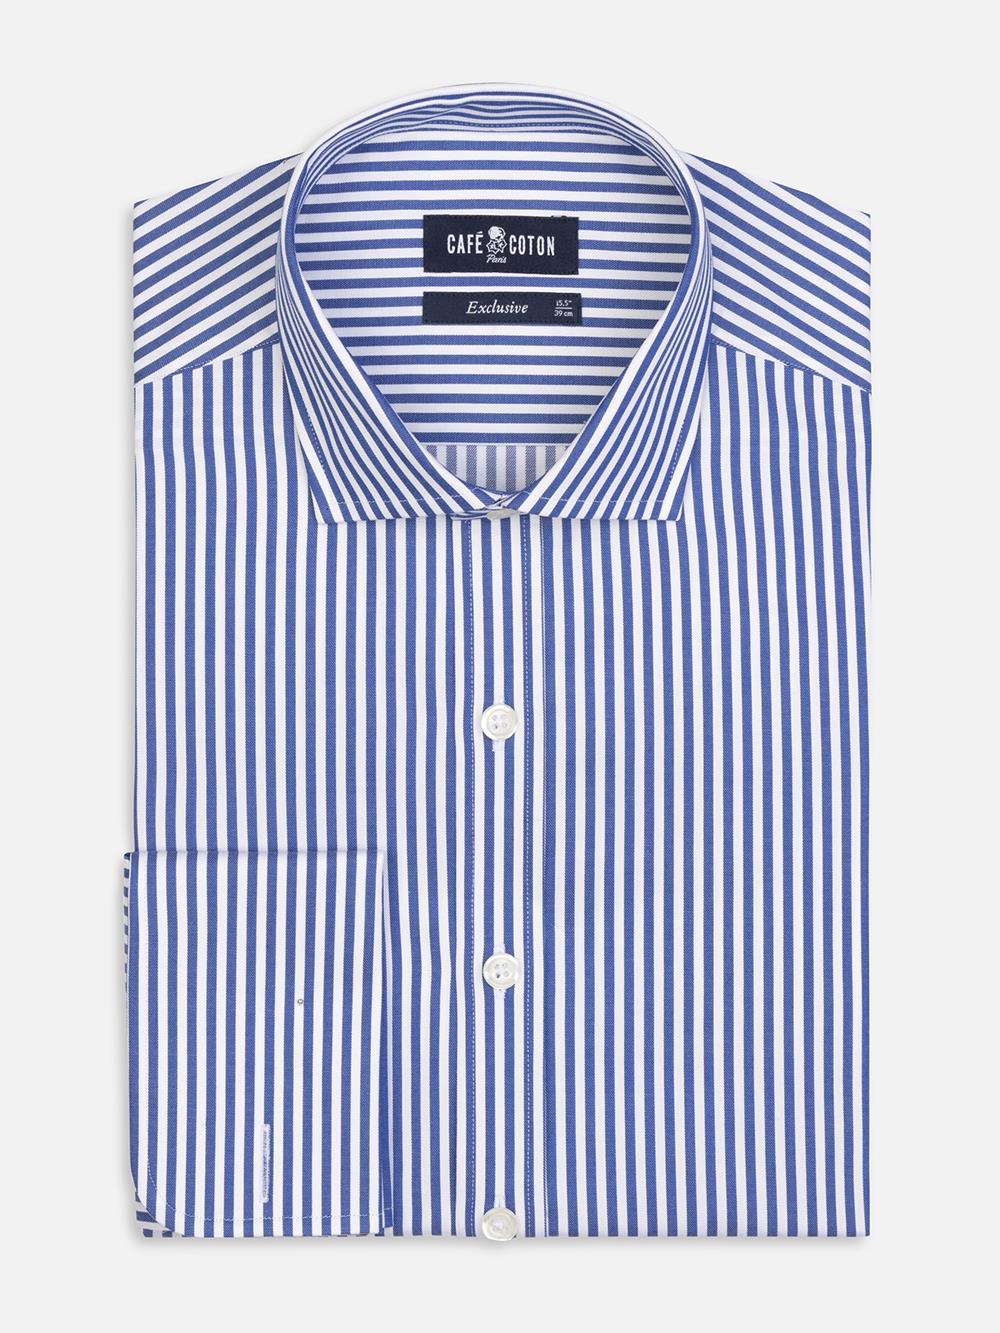 Barry stripe shirt with double cuffs - Navy